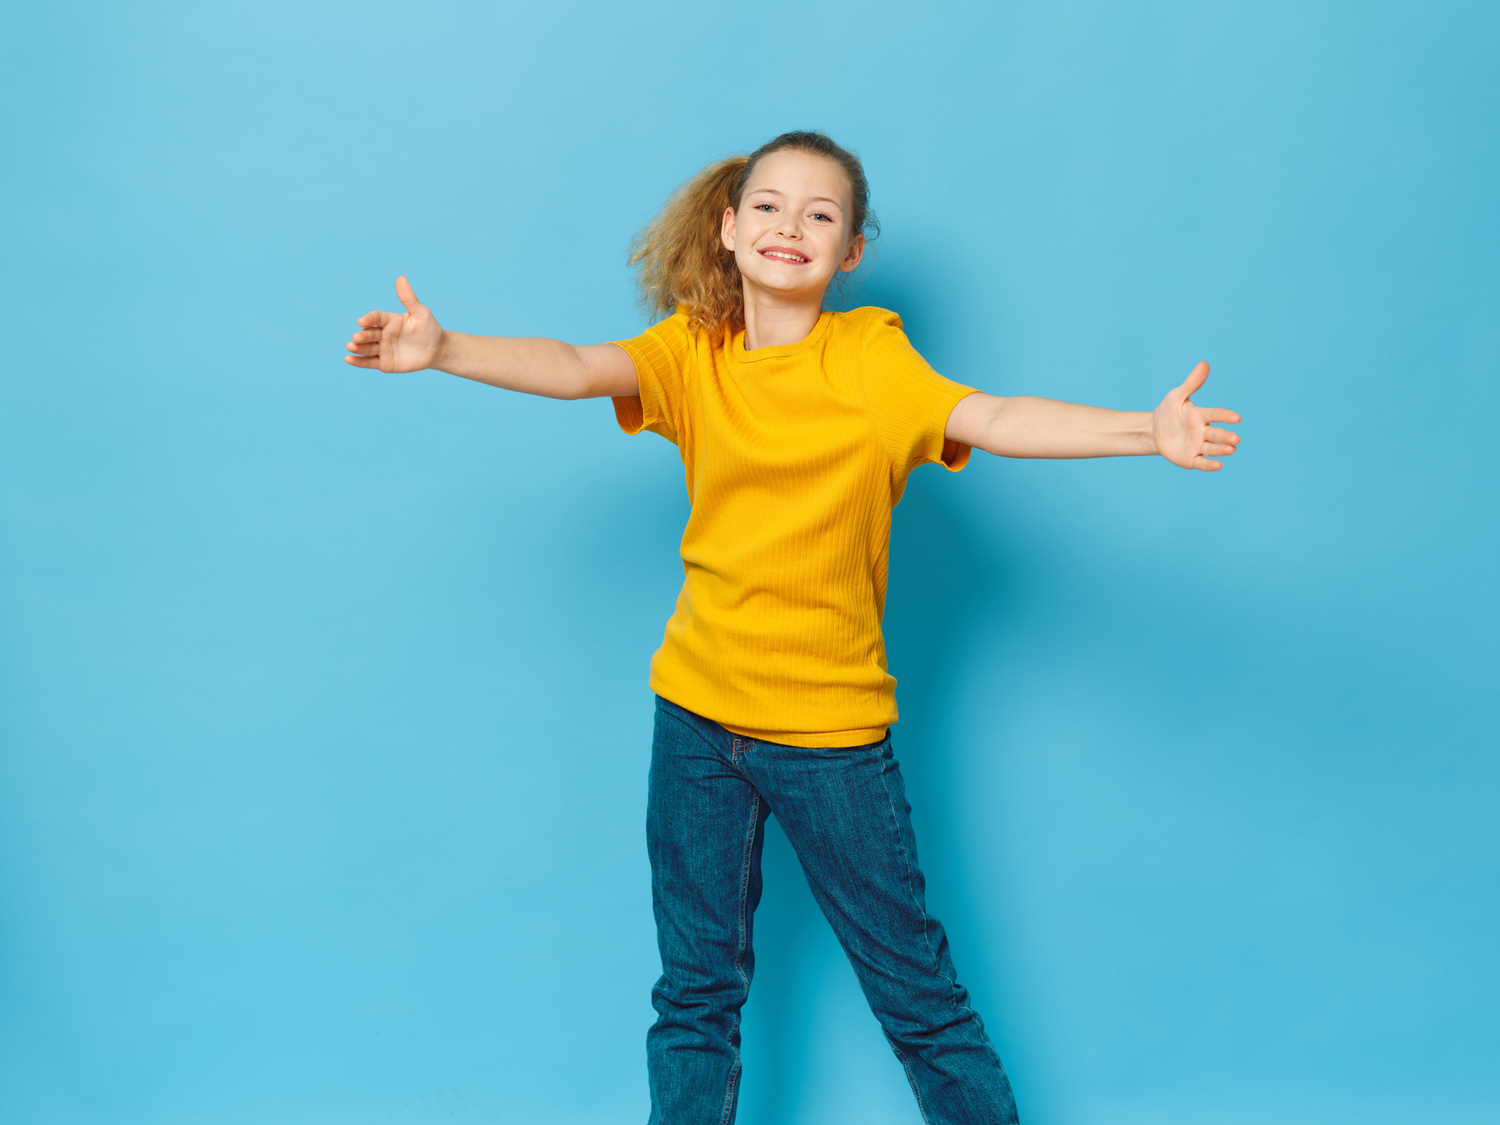 Girl in Yellow Shirt with Open Arms on Blue Background